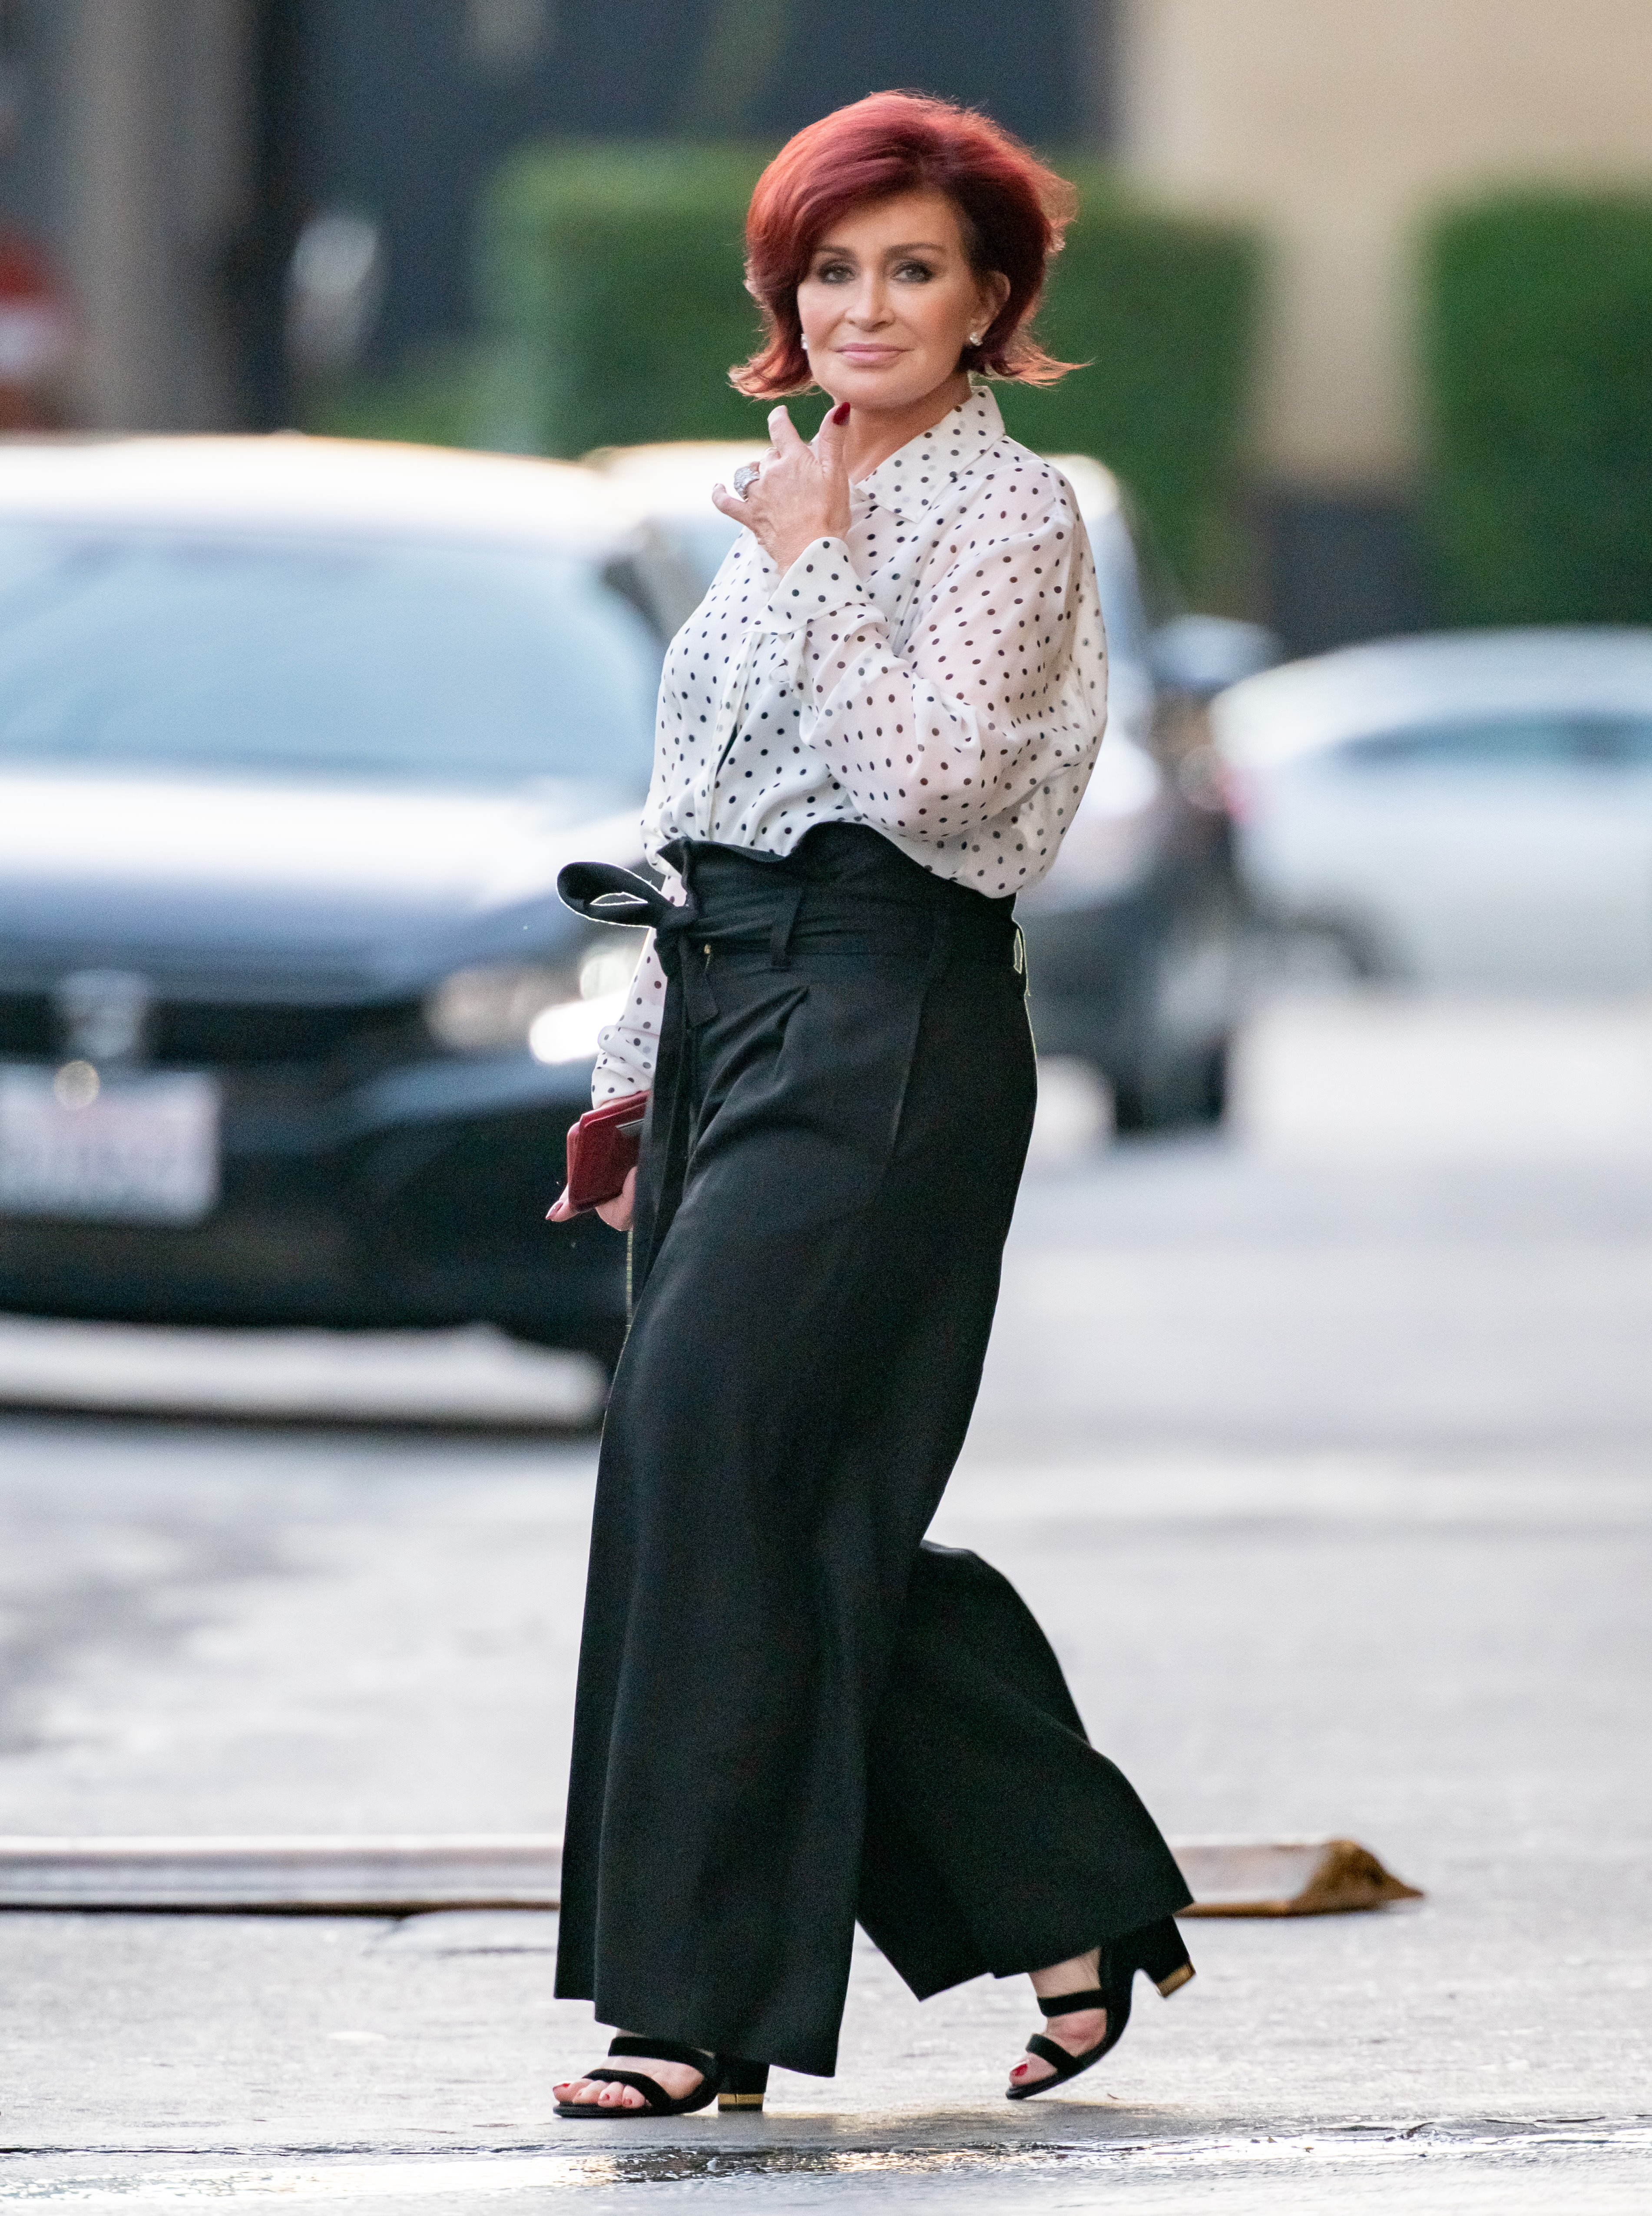 Sharon Osbourne stepping out for her appearance at "Jimmy Kimmel Live" in Los Angeles, California, on September 11, 2019 | Source: Getty Images